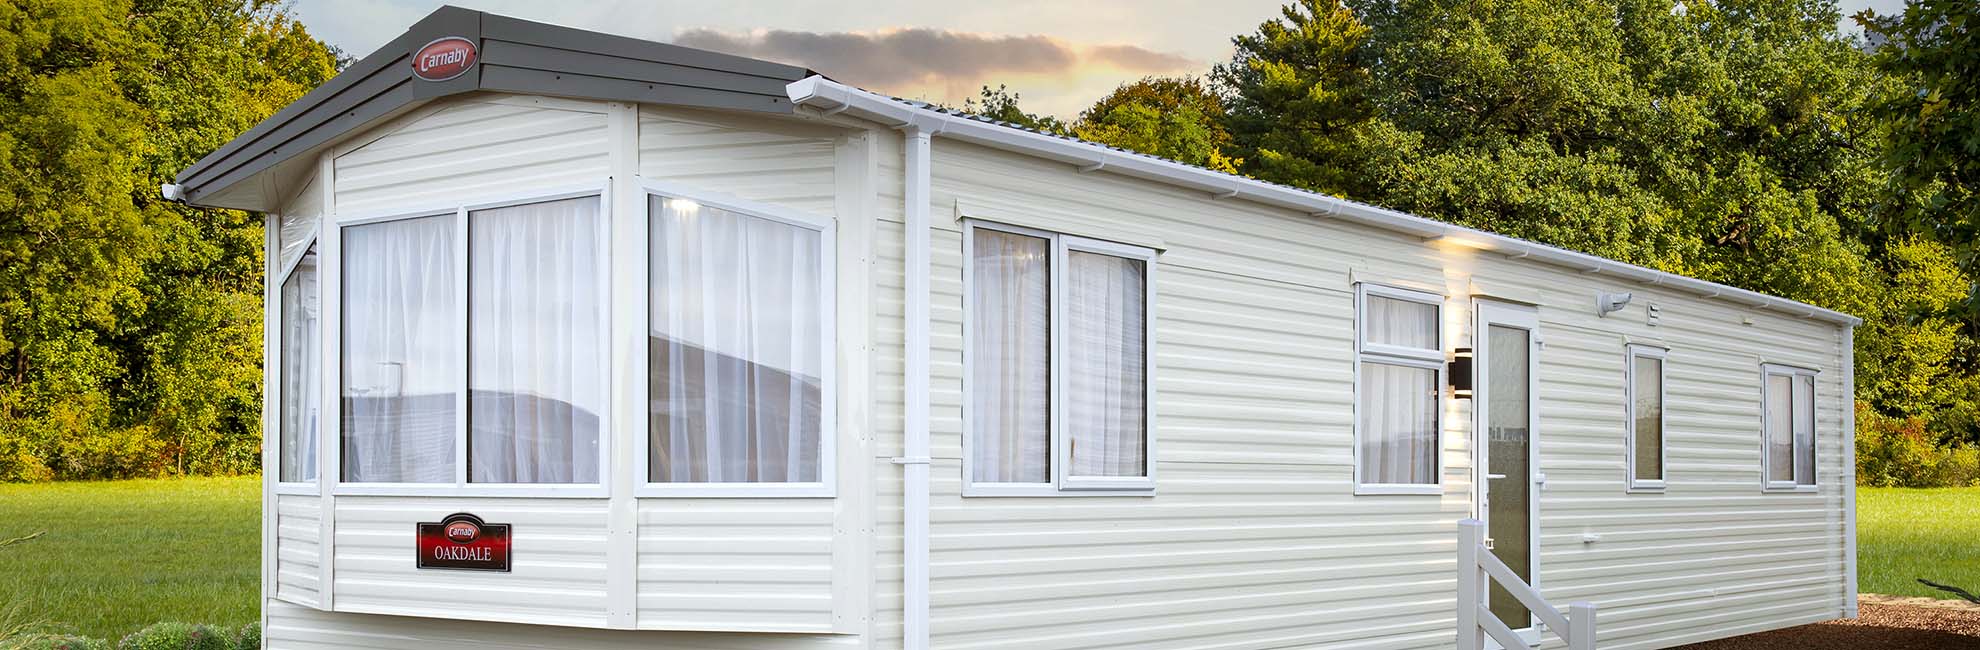 Exterior of a Carnaby Oakdale static caravan for sale